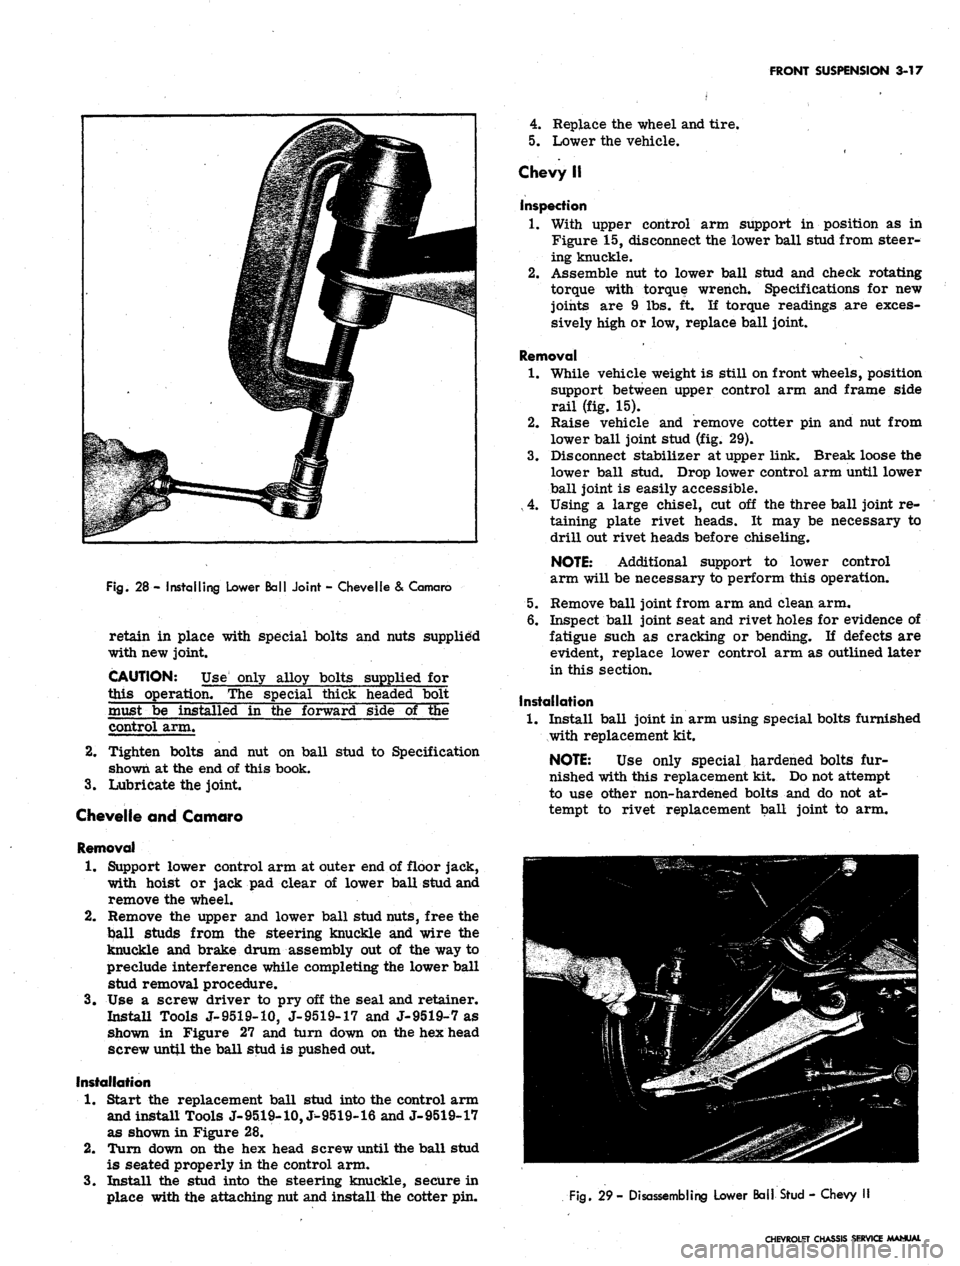 CHEVROLET CAMARO 1967 1.G Chassis User Guide 
FRONT SUSPENSION 3-17

4.
 Replace the wheel and tire.

5.
 Lower the vehicle.

Chevy II

inspection

Fig.
 28 - Installing Lower Ball Joint - Chevelle & Camaro

retain in place with special bolts an